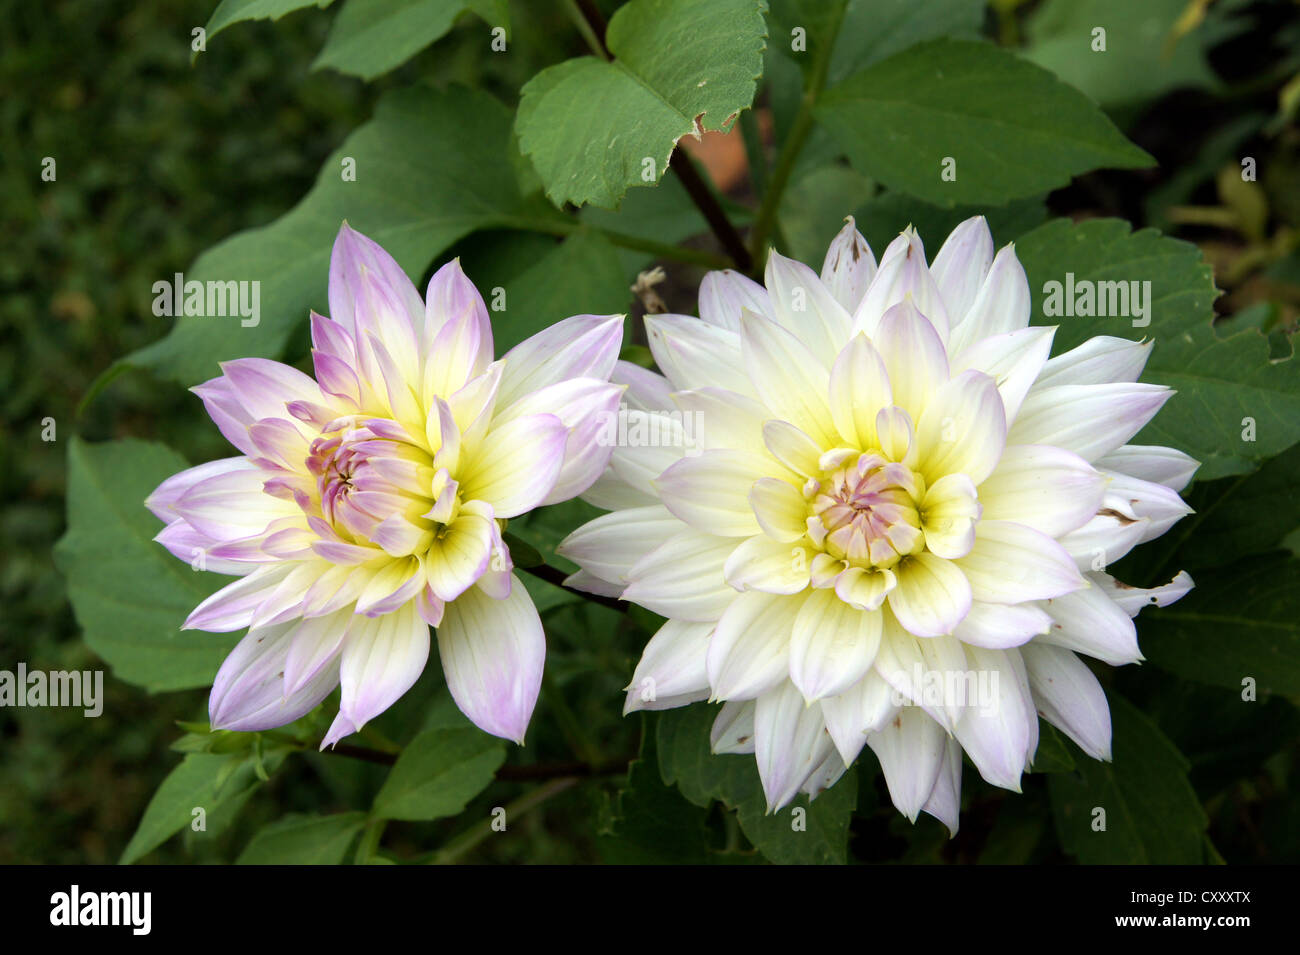 Two white dahlias on a background of green leaves Stock Photo